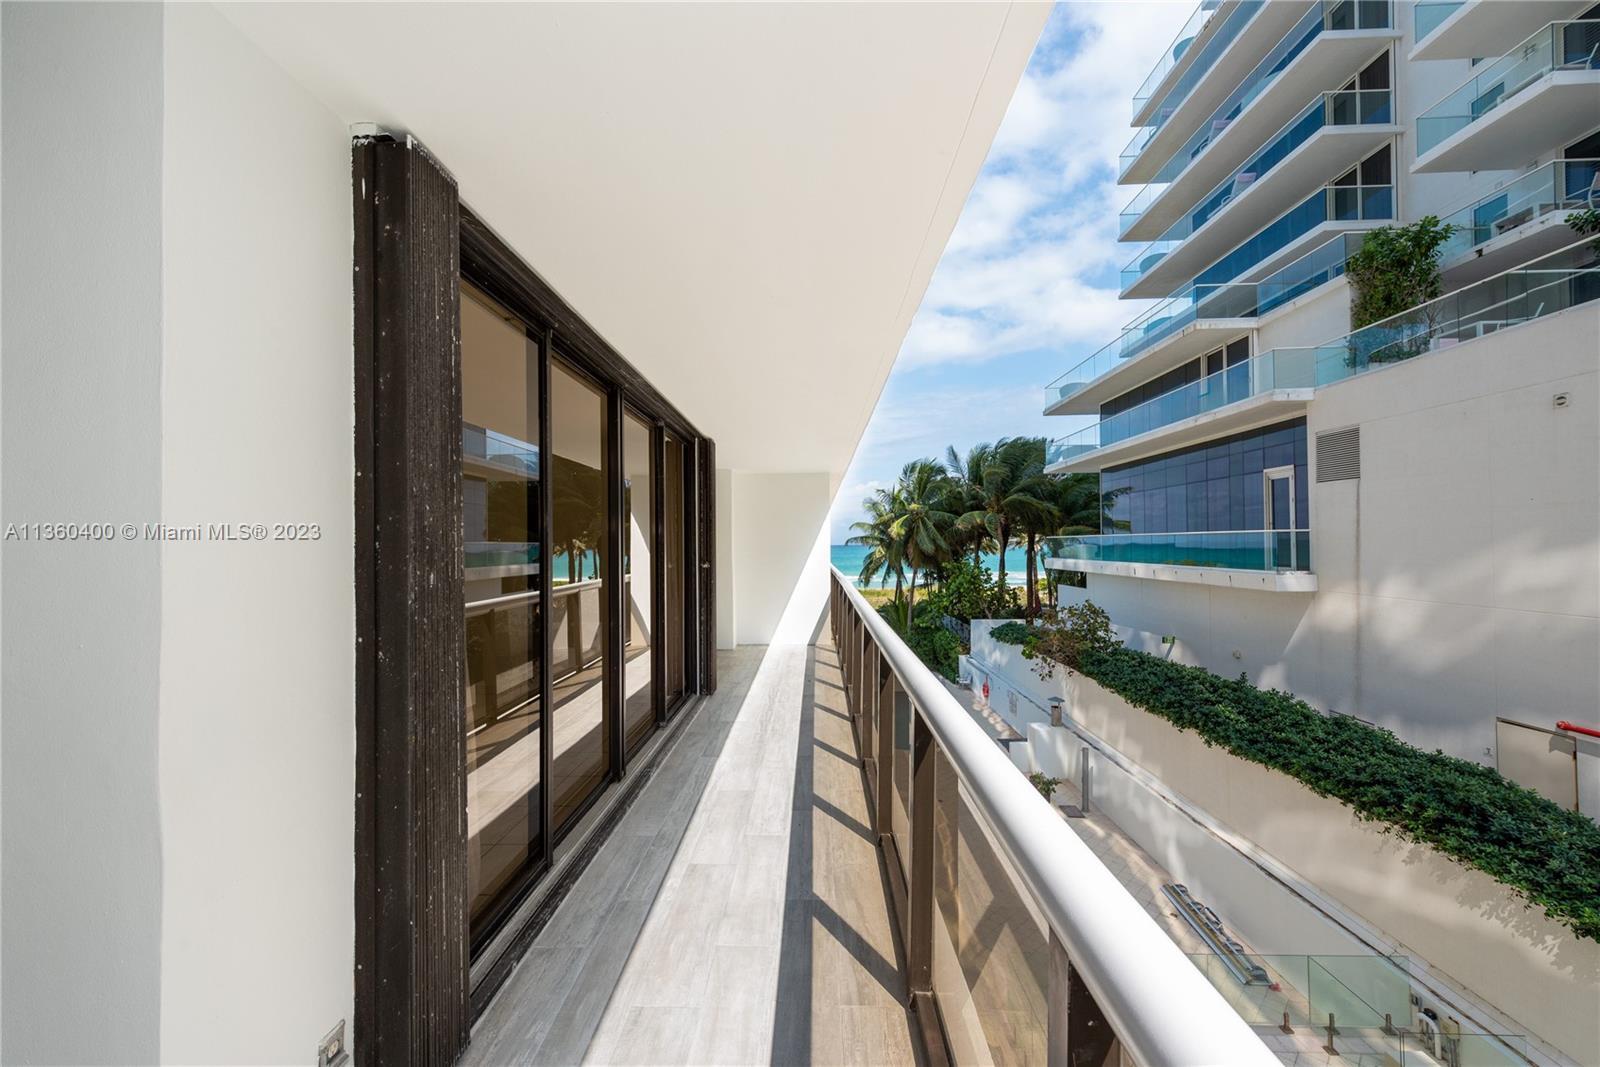 Exclusive Beach Front condo in the best location: Surfside. Spacious Living & Dining area with open 